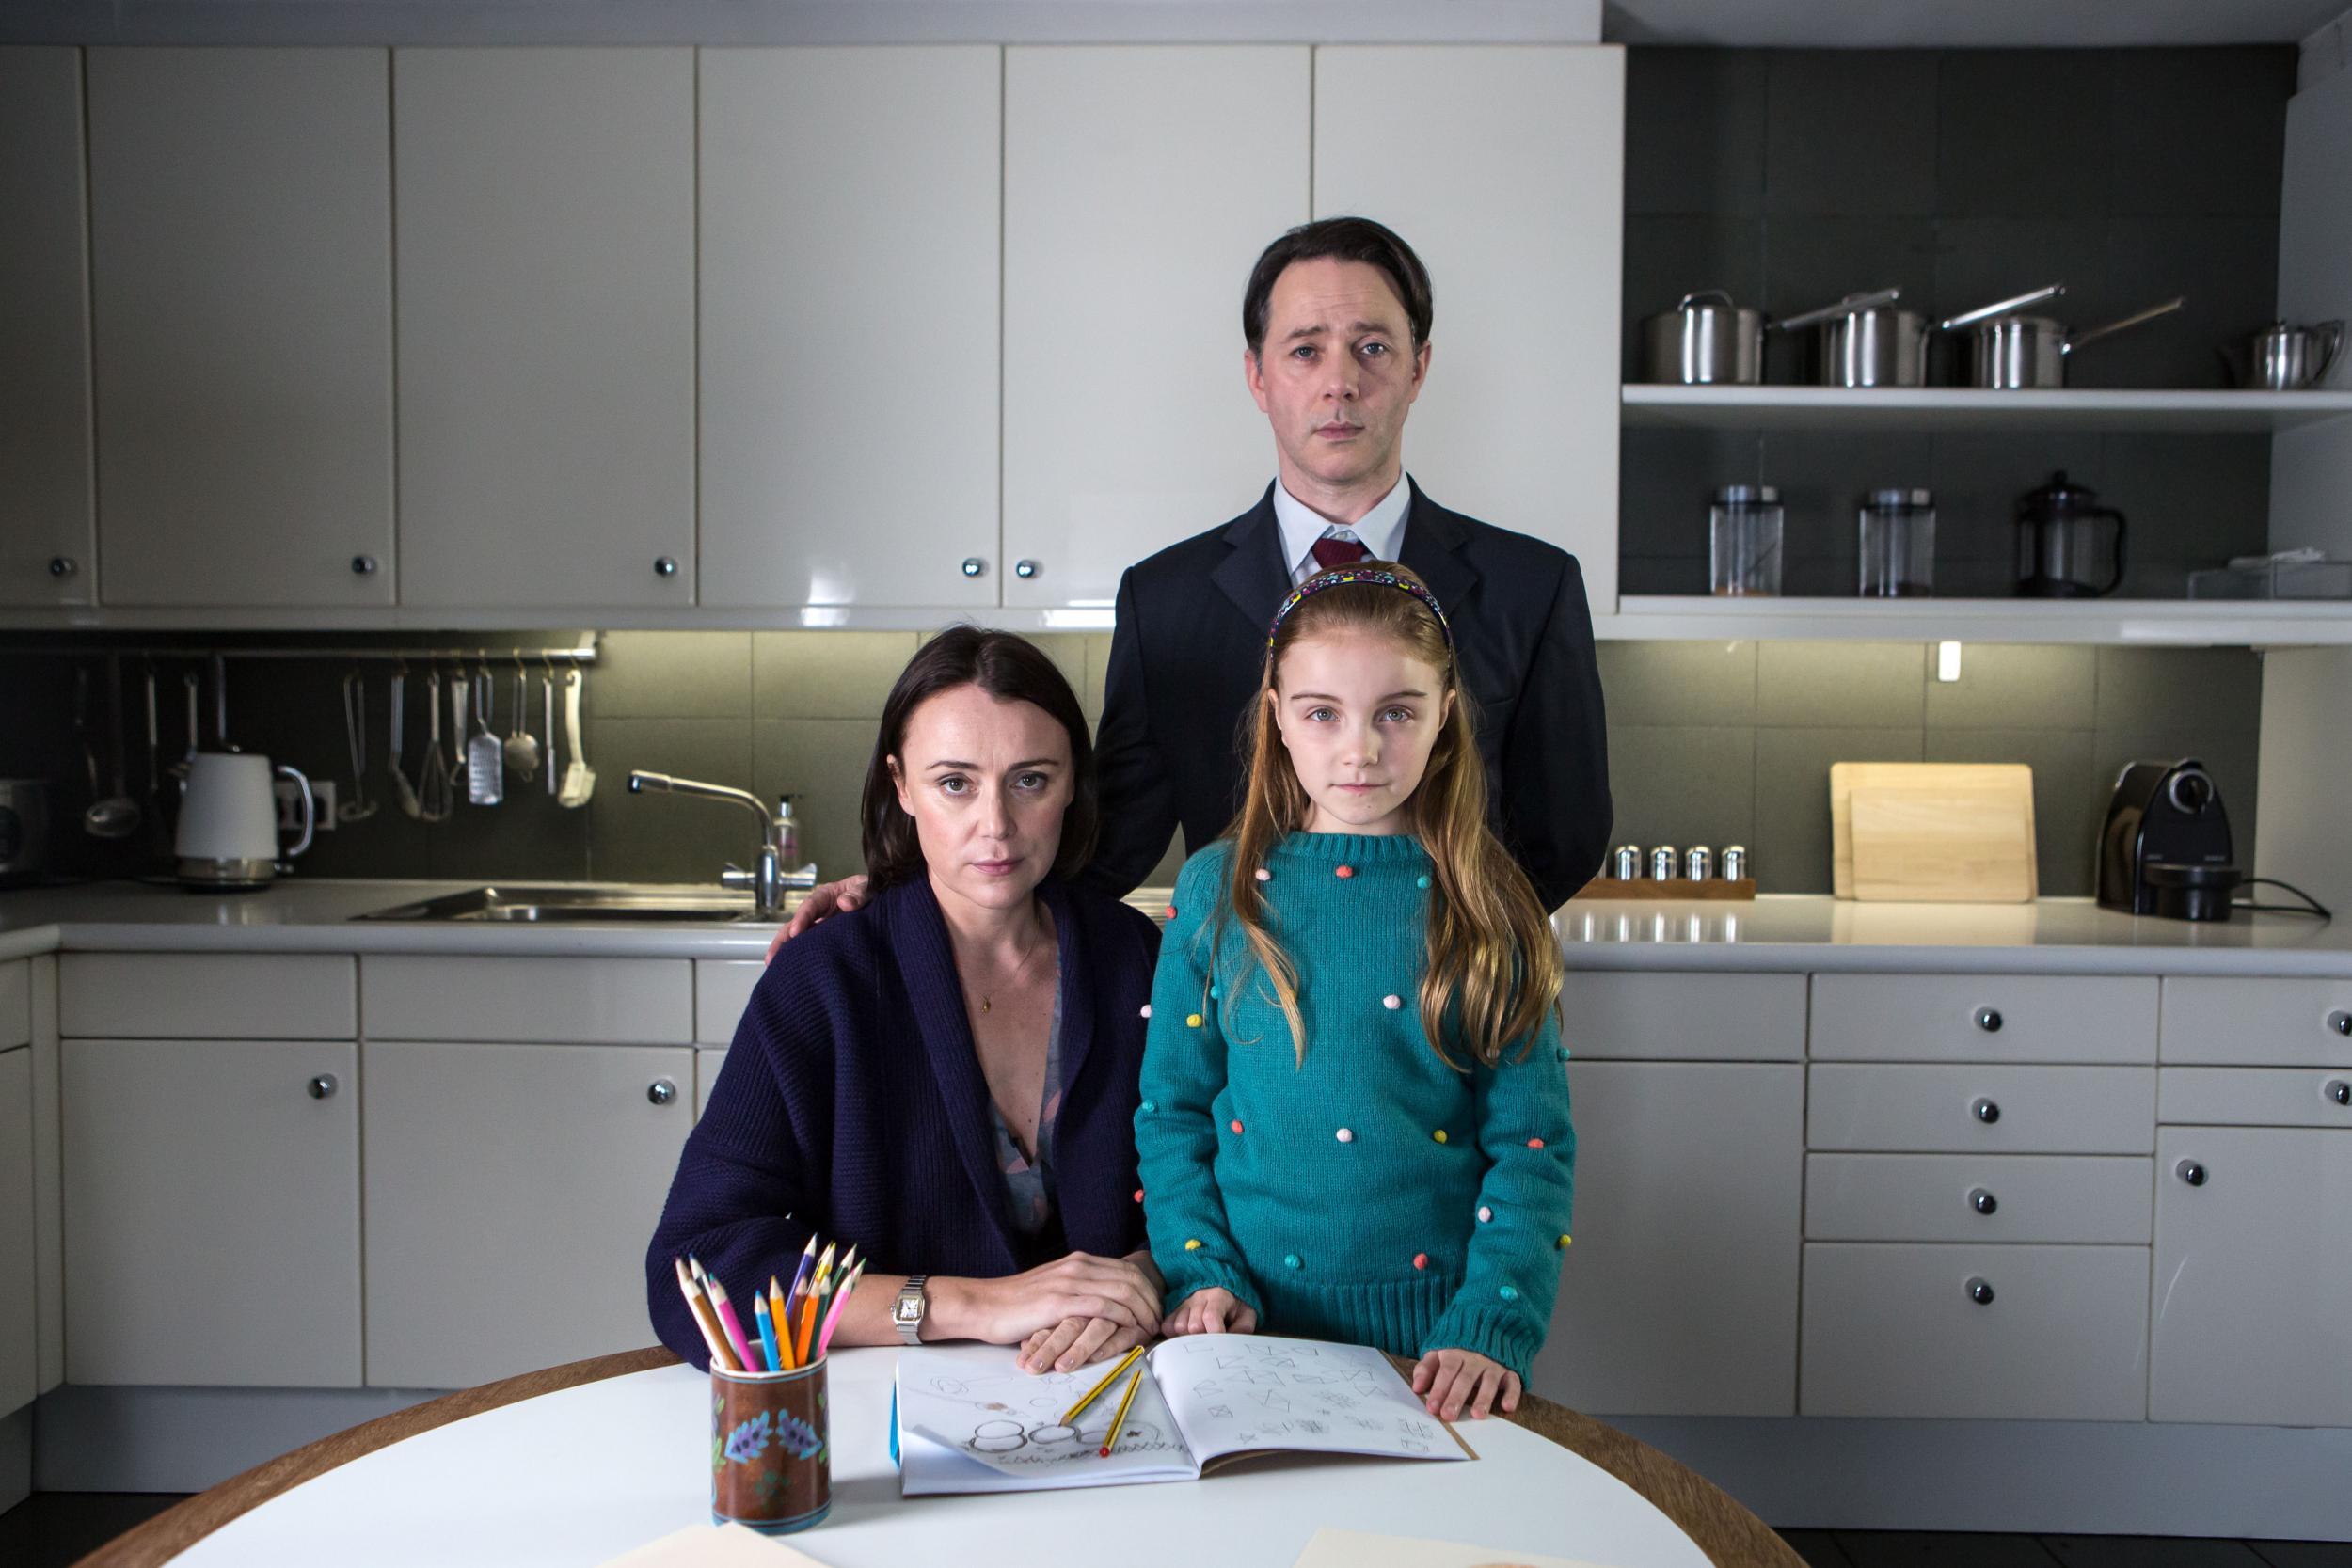 The discovery of a lone shoe brings unexpected consequences for Reece Shearsmith and Keeley Hawes in ‘Inside No 9’